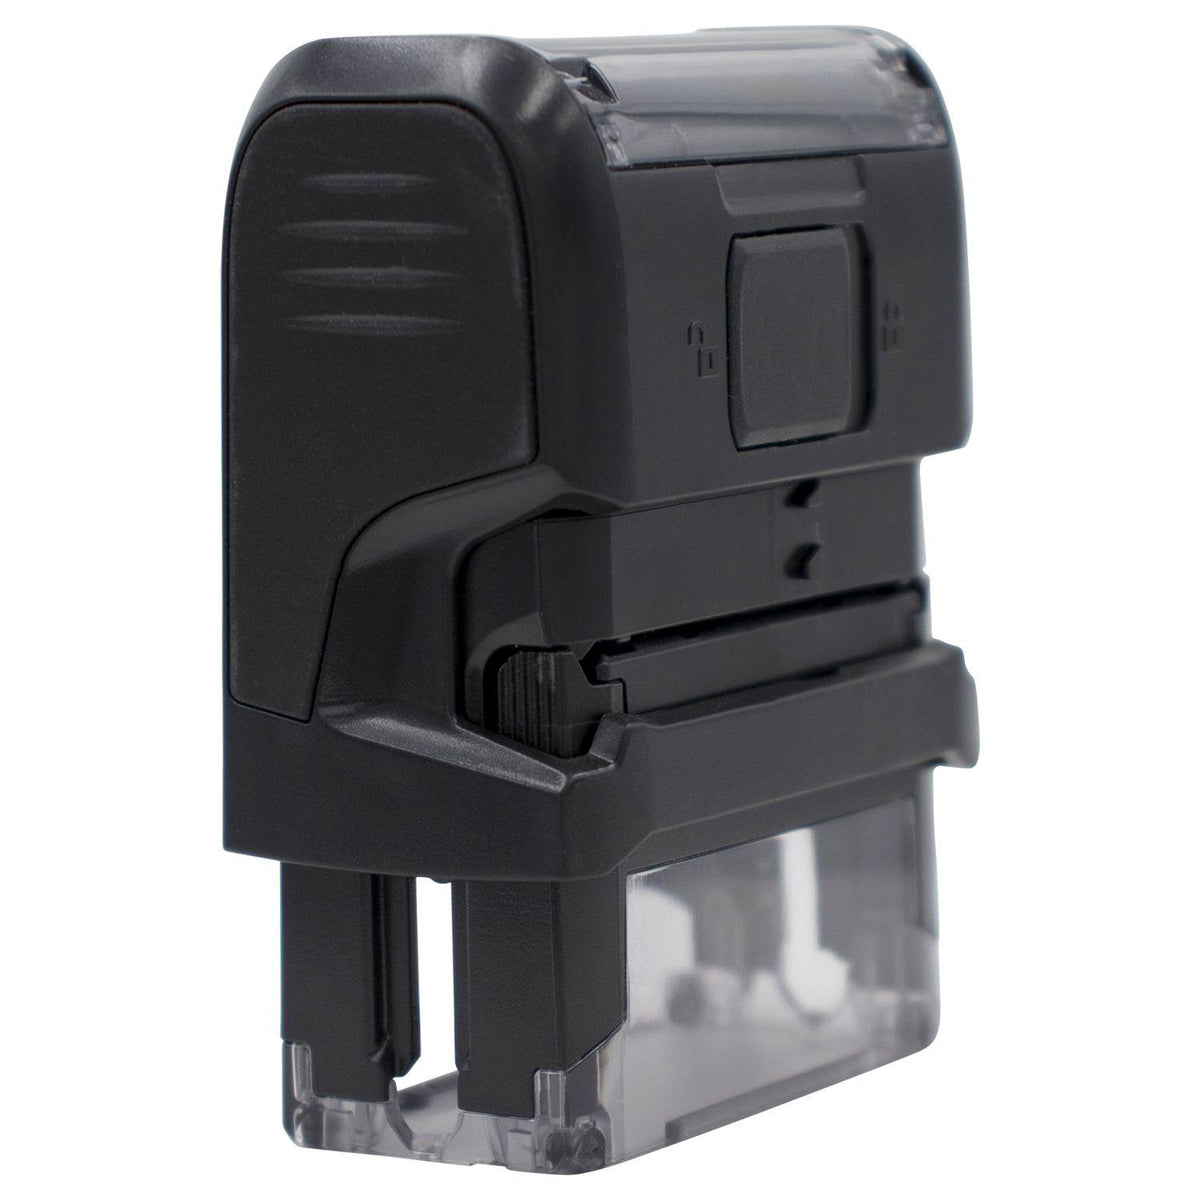 Self-Inking File Copy with Drawer Stamp - Engineer Seal Stamps - Brand_Trodat, Impression Size_Small, Stamp Type_Self-Inking Stamp, Type of Use_General, Type of Use_Office